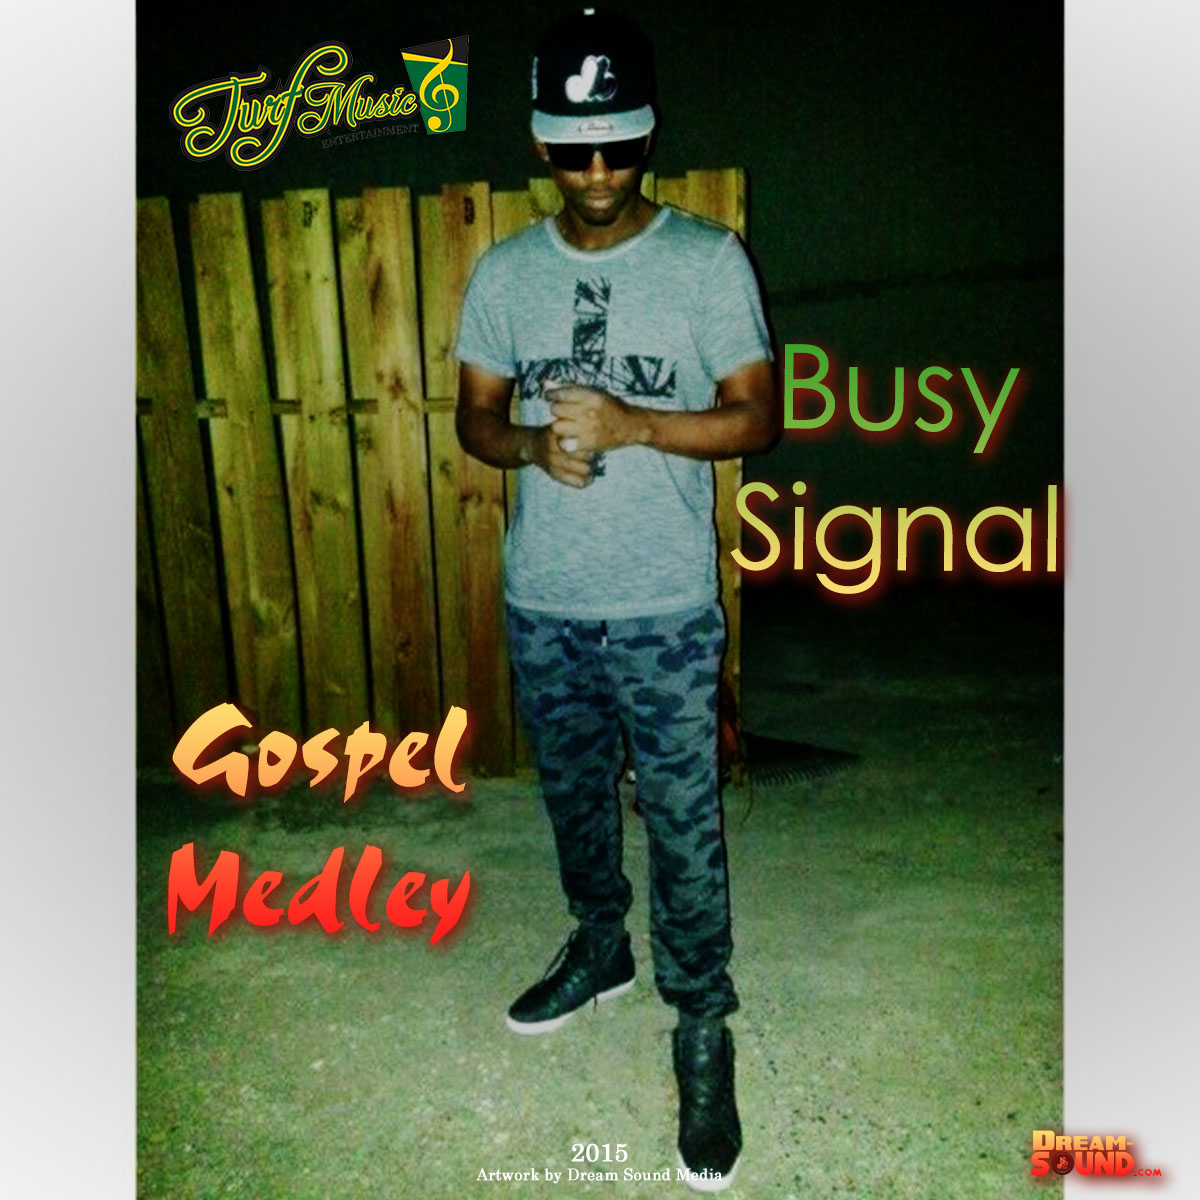 Busy Signal delivers a powerful message in Gospel Medley from 2015!

#DSM973Single #DSM973Throwback #BusySignal #GospelMedley #Dancehall #Gospel #Inspiration #UpliftingMusic @busysignal_turf

P.S. Check out more on Dream Sound Media! ➡️ youtu.be/wJEoS4n9LIA